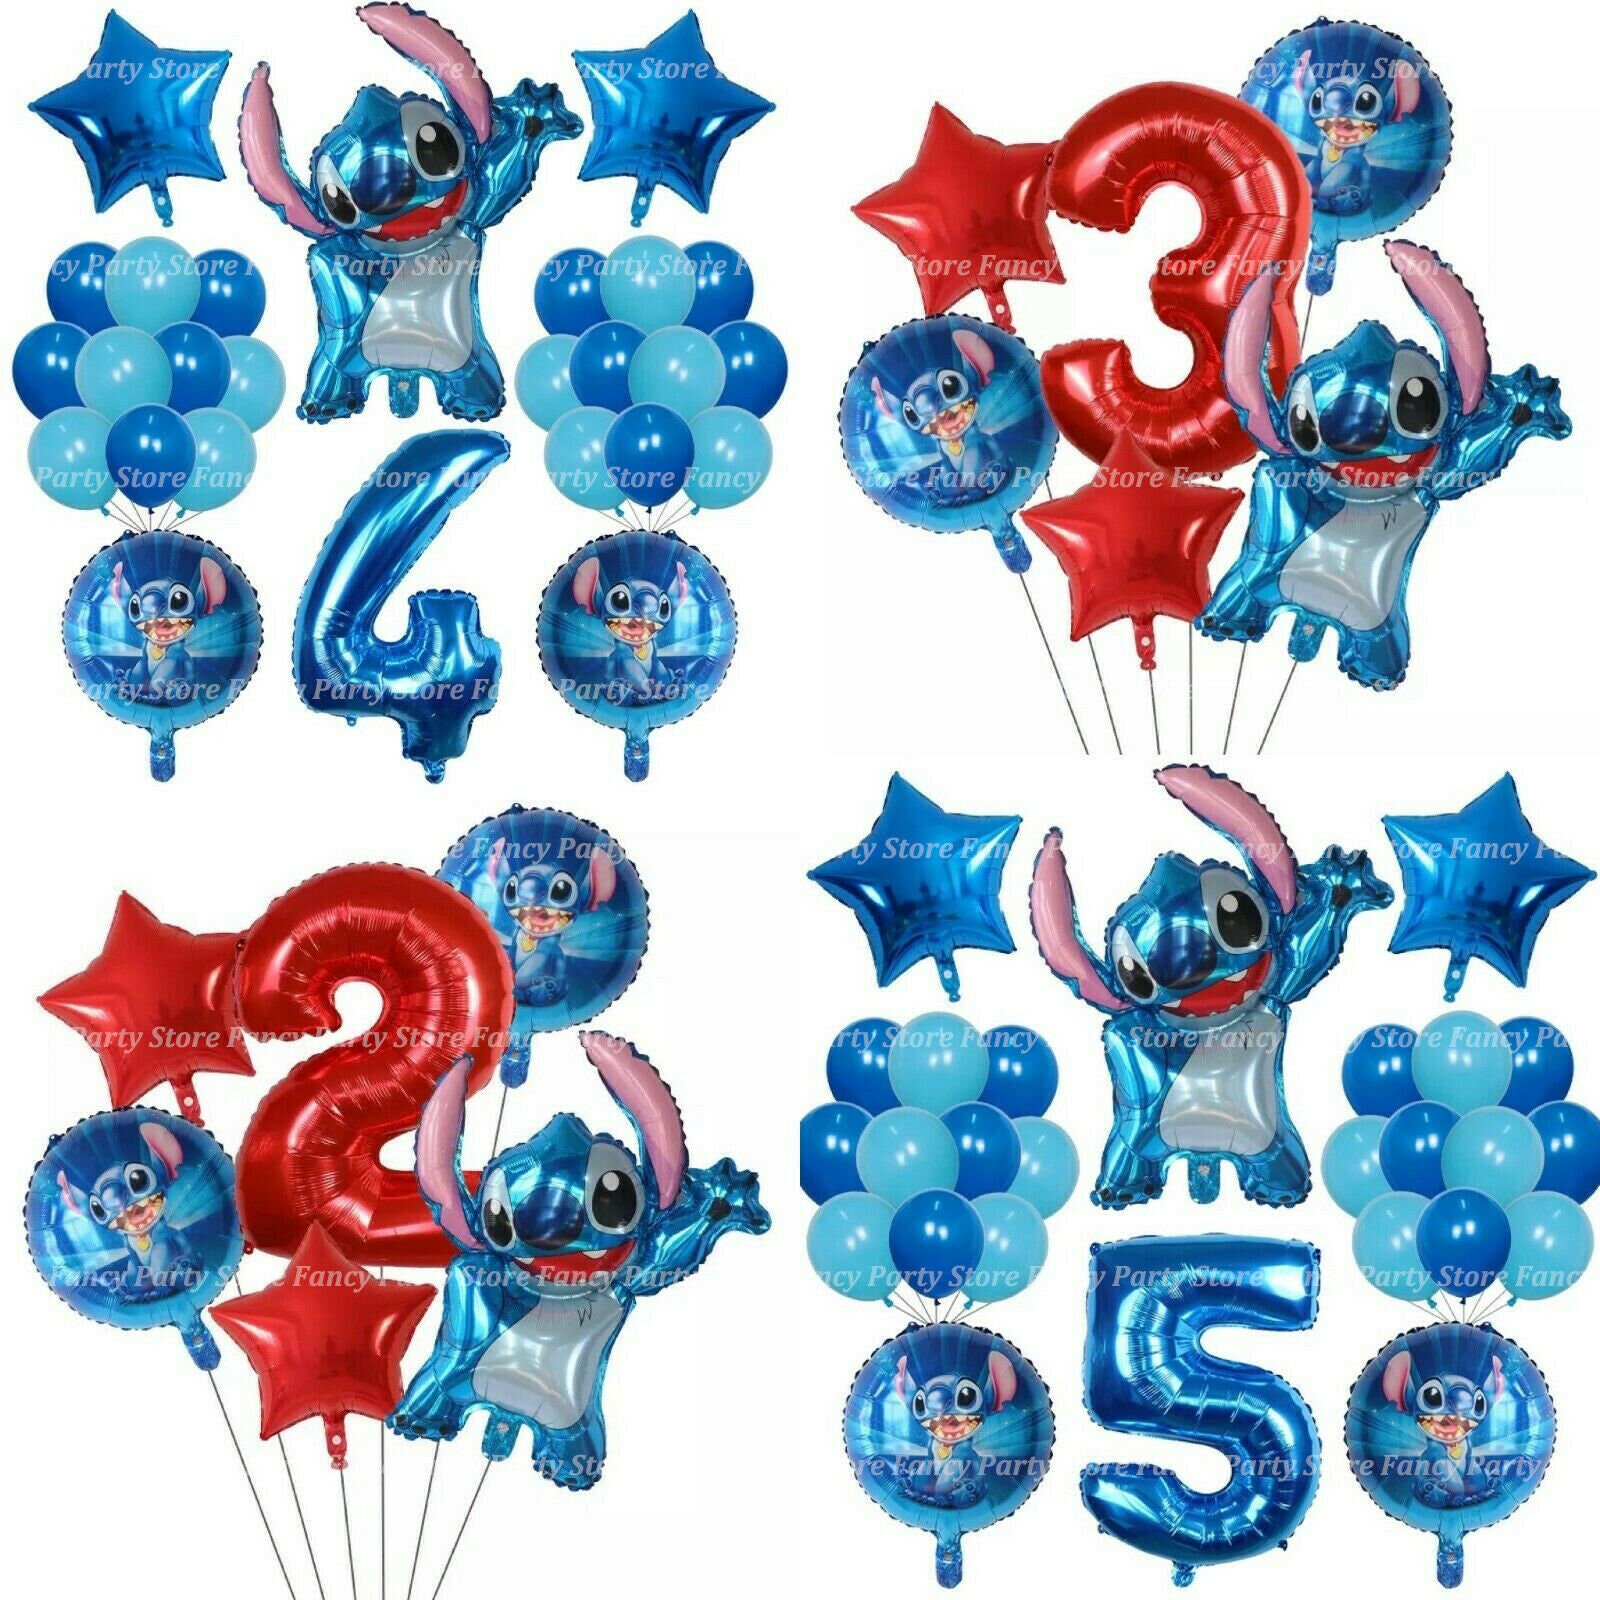 Buy Lilo and Stitch Birthday Balloons Stitch Party Decorations